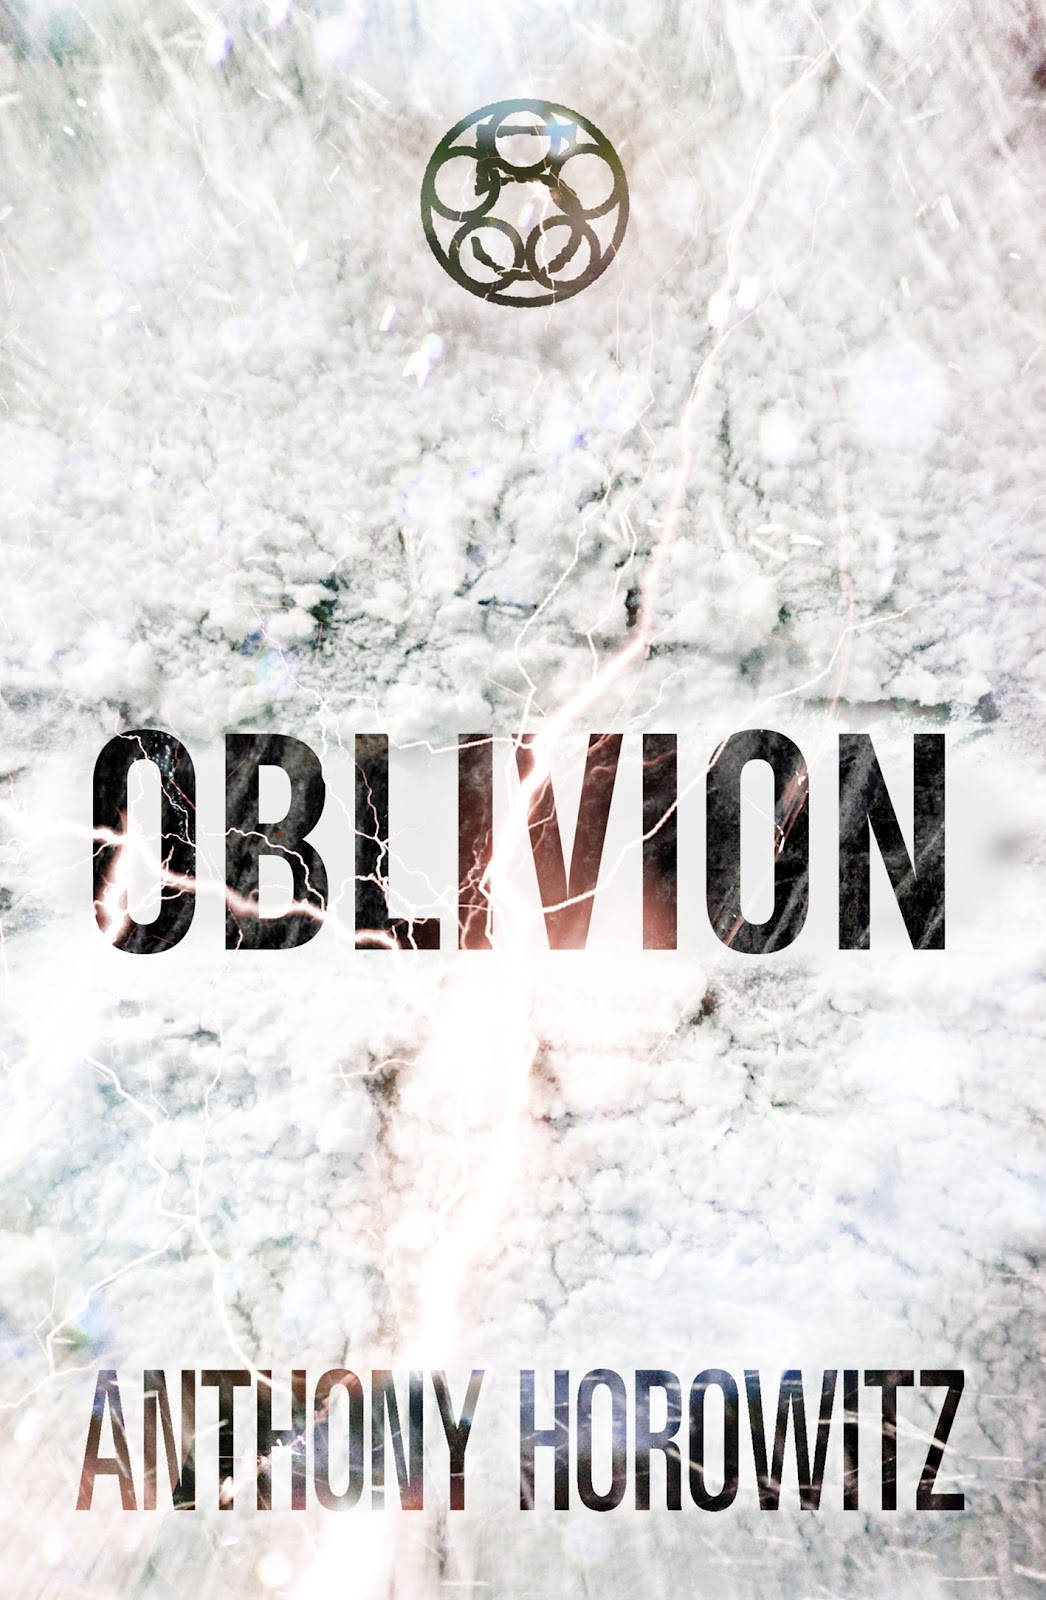 Oblivion: The Gatekeepers, Book 5